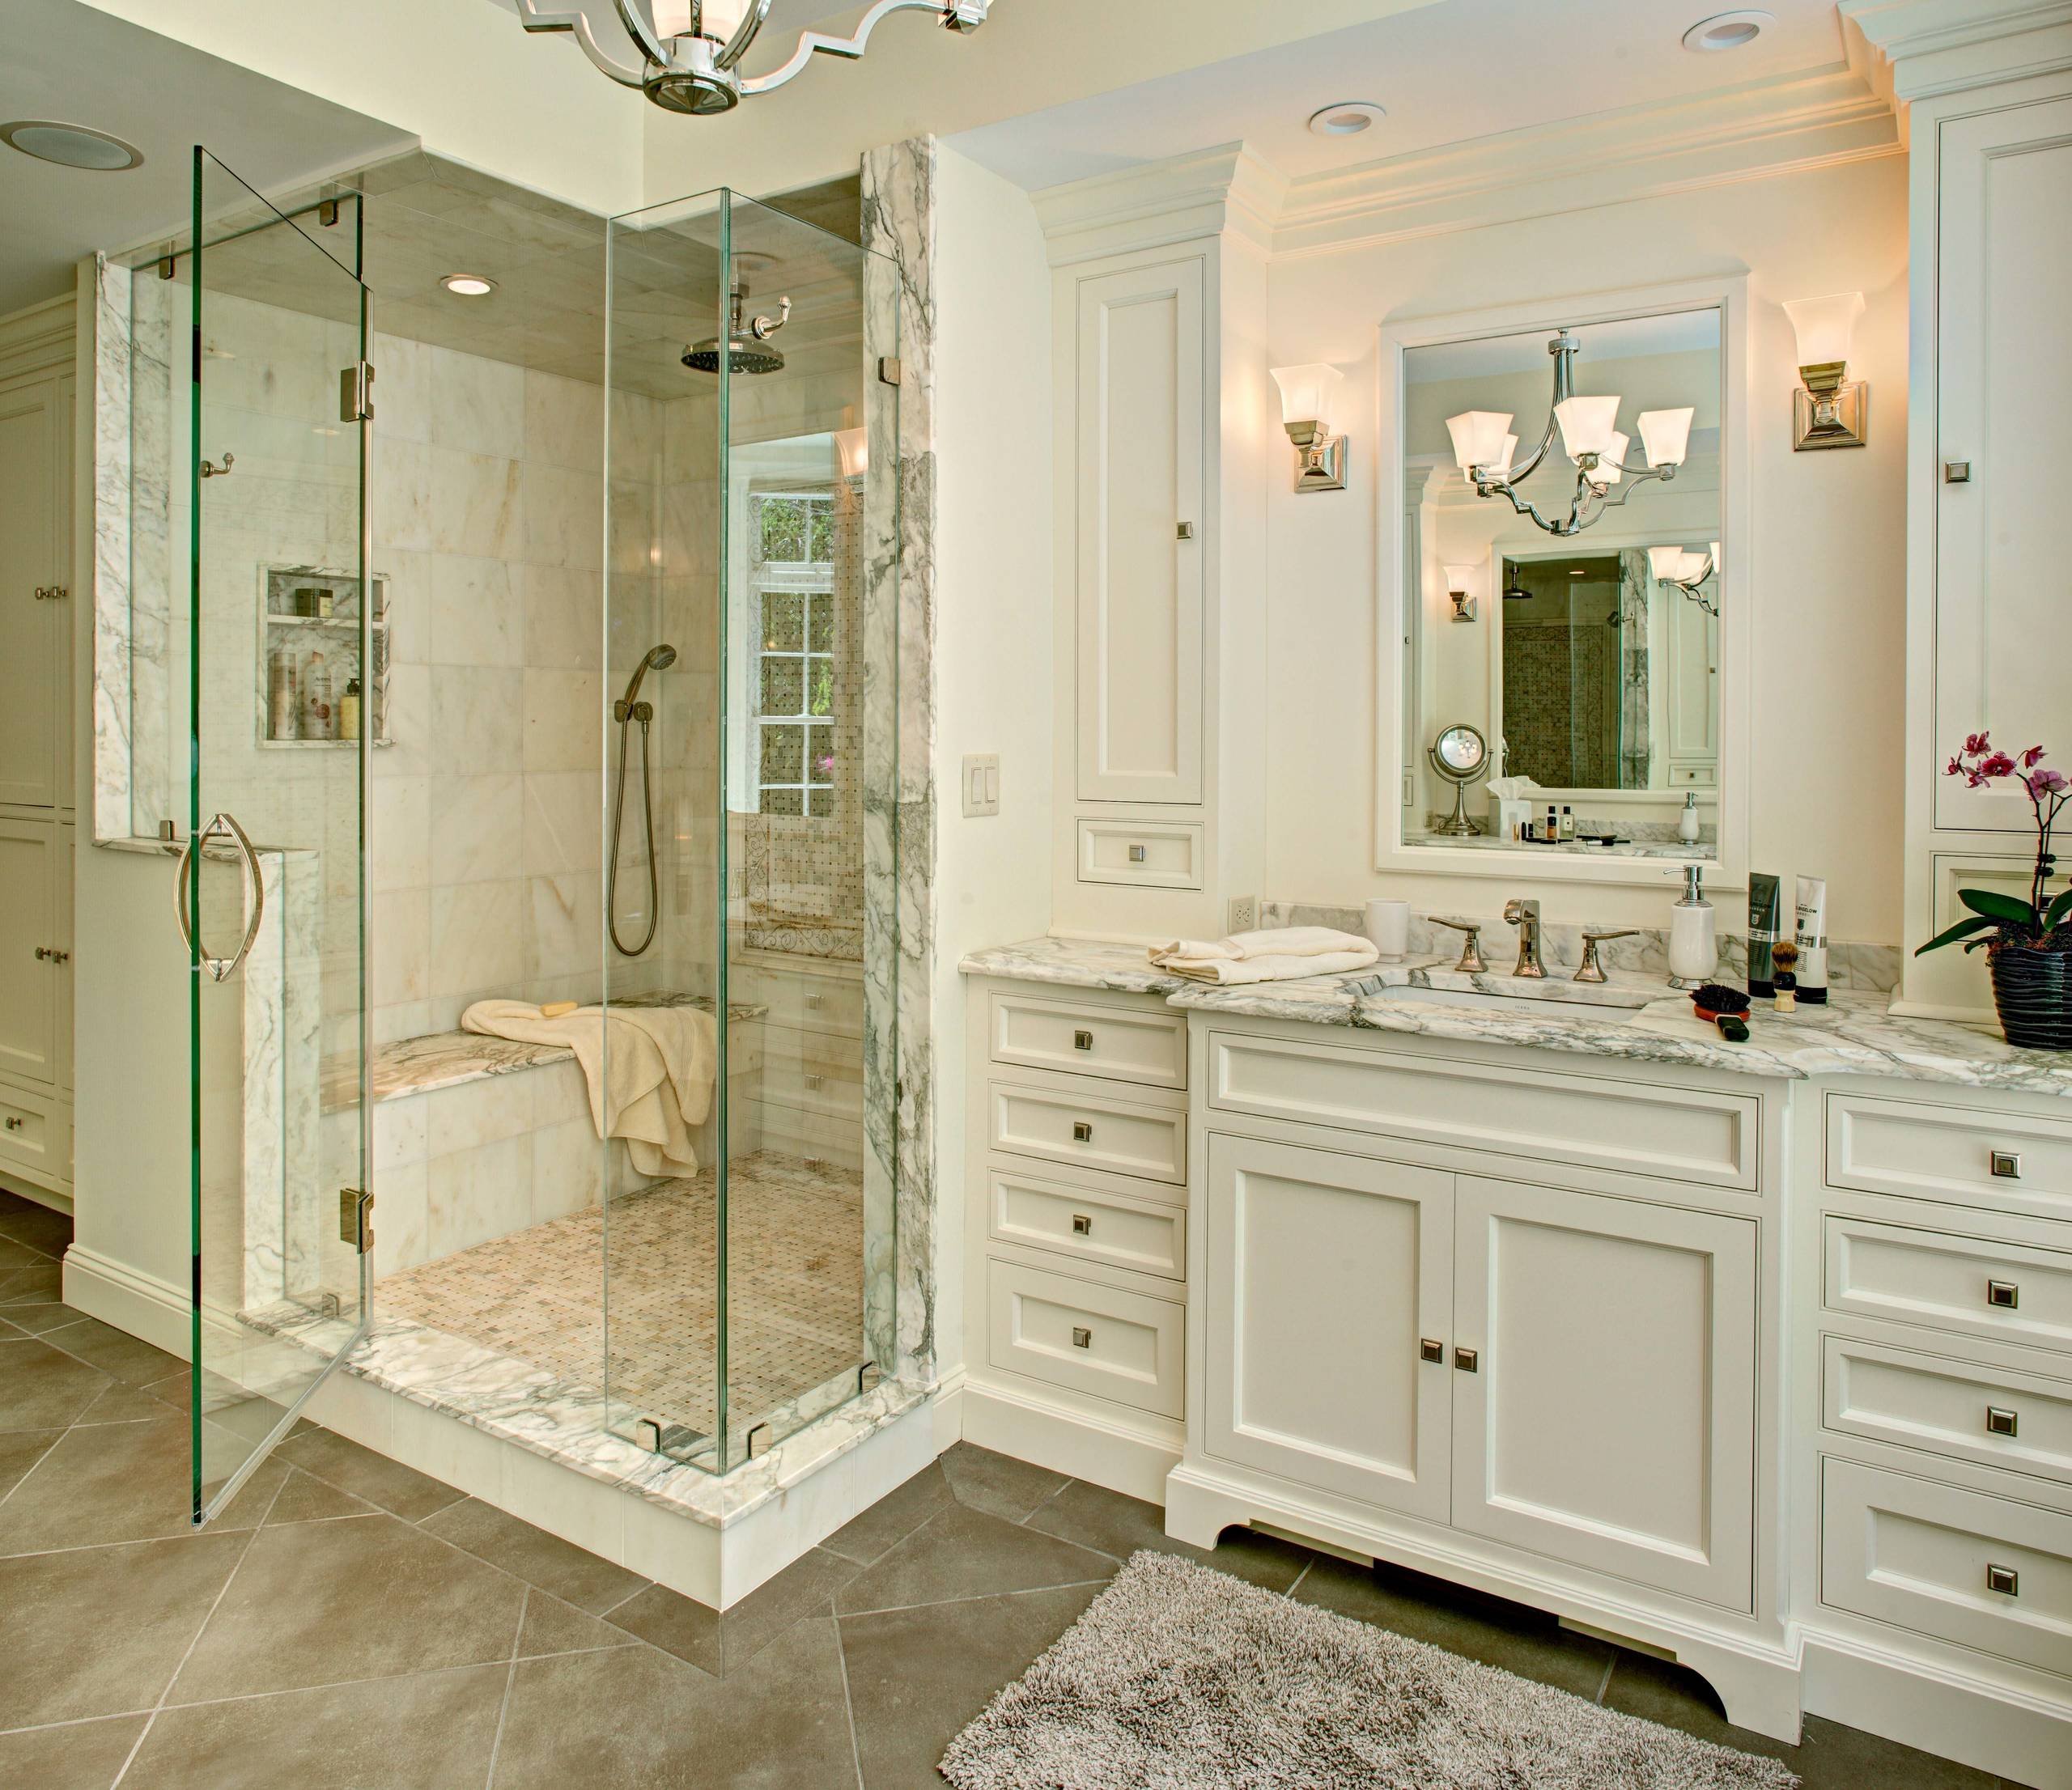 75 Beautiful Master Bathroom Pictures Ideas July 2021 Houzz from st.hzcdn.c...